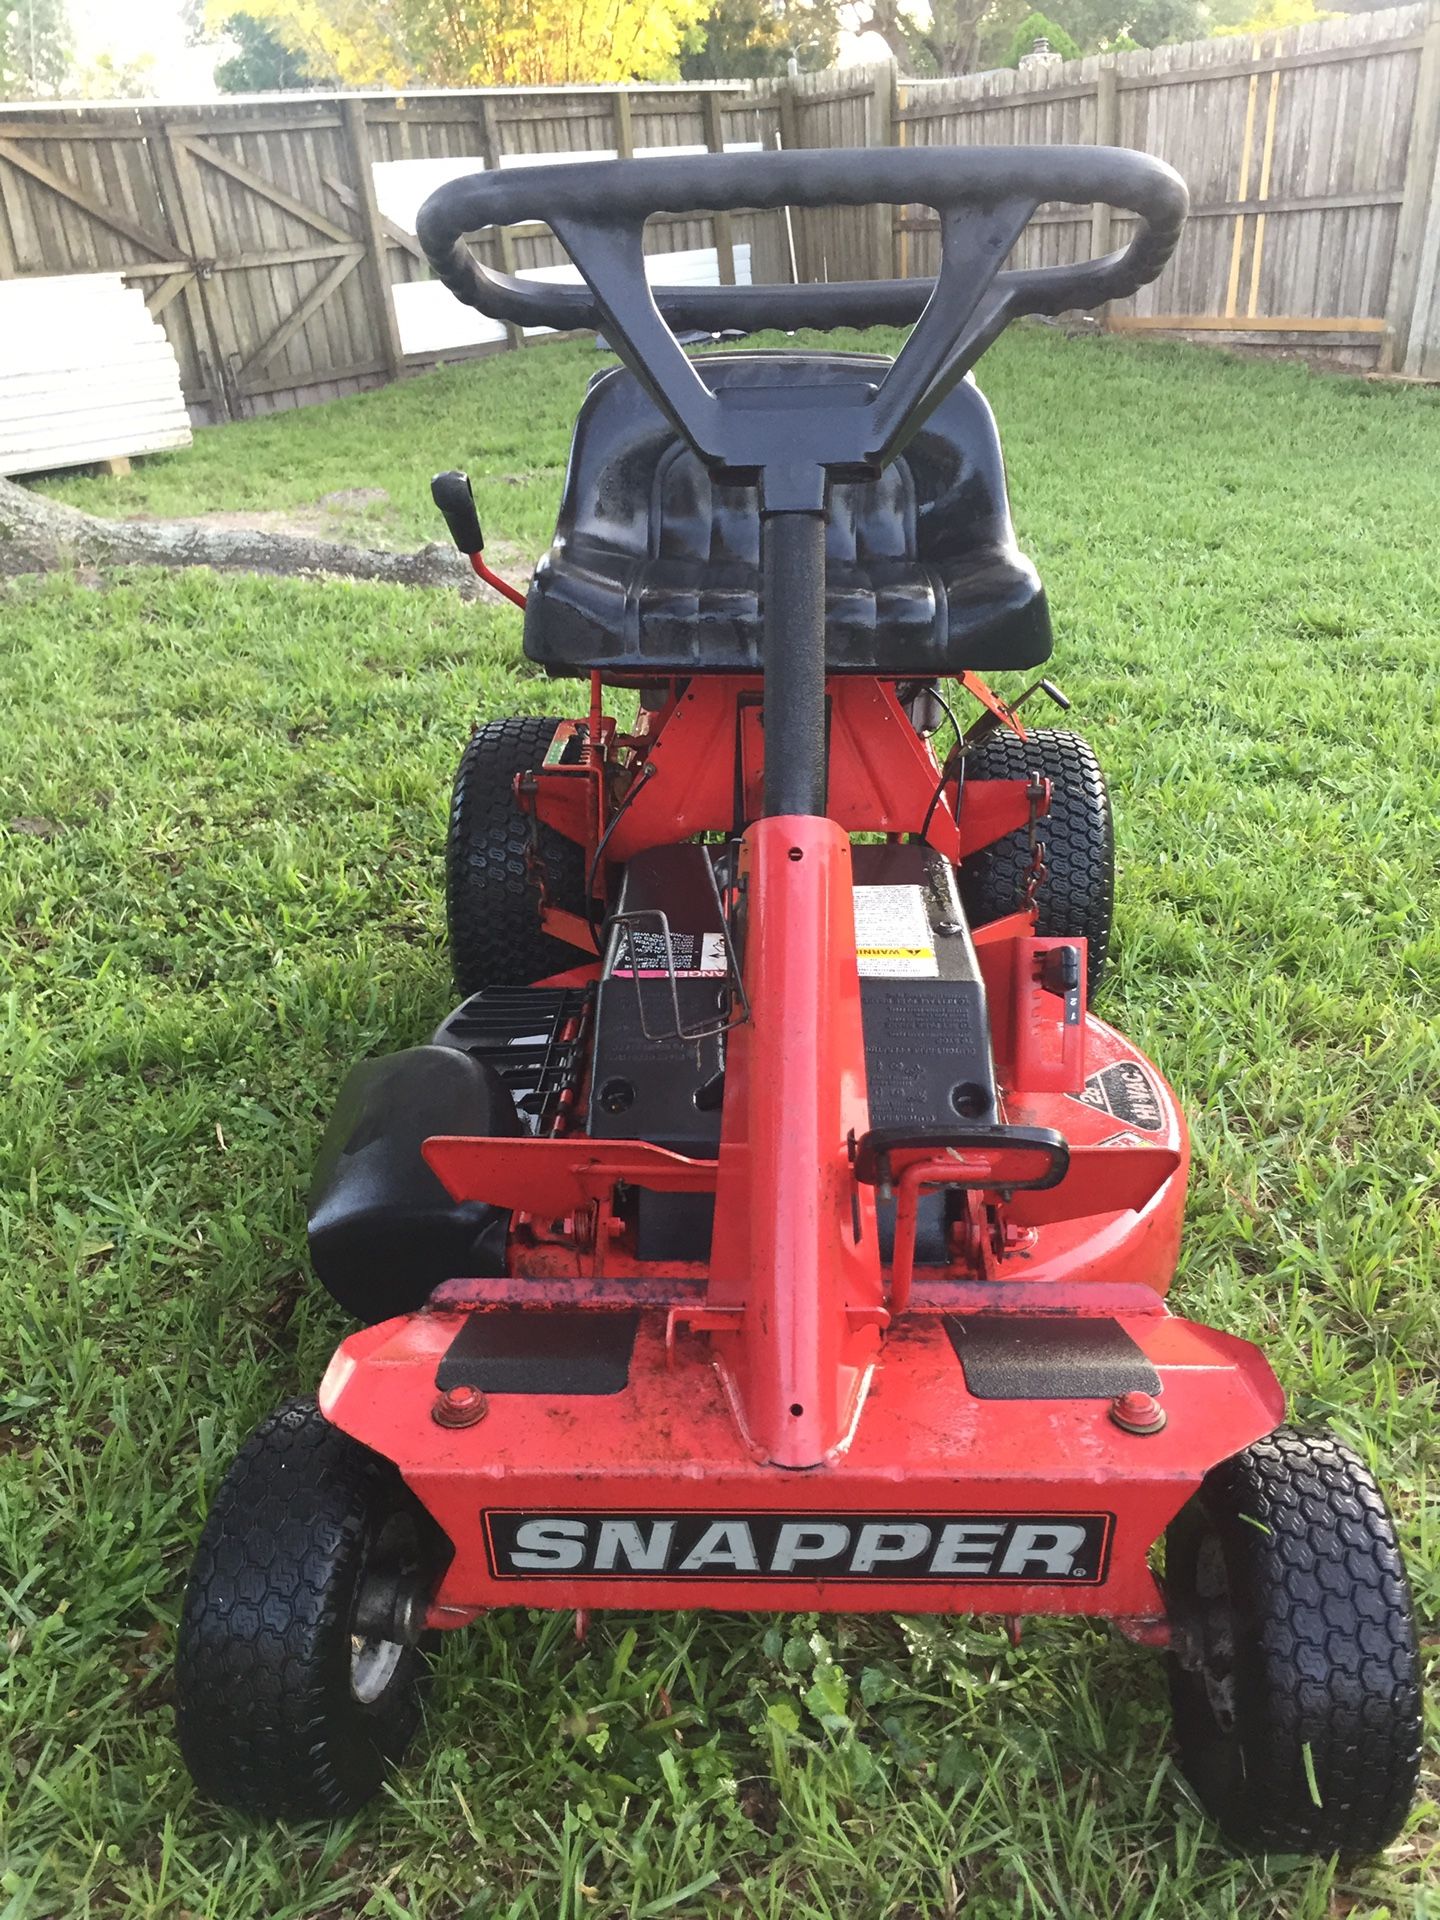 Snapper 28” Riding Lawn Mower